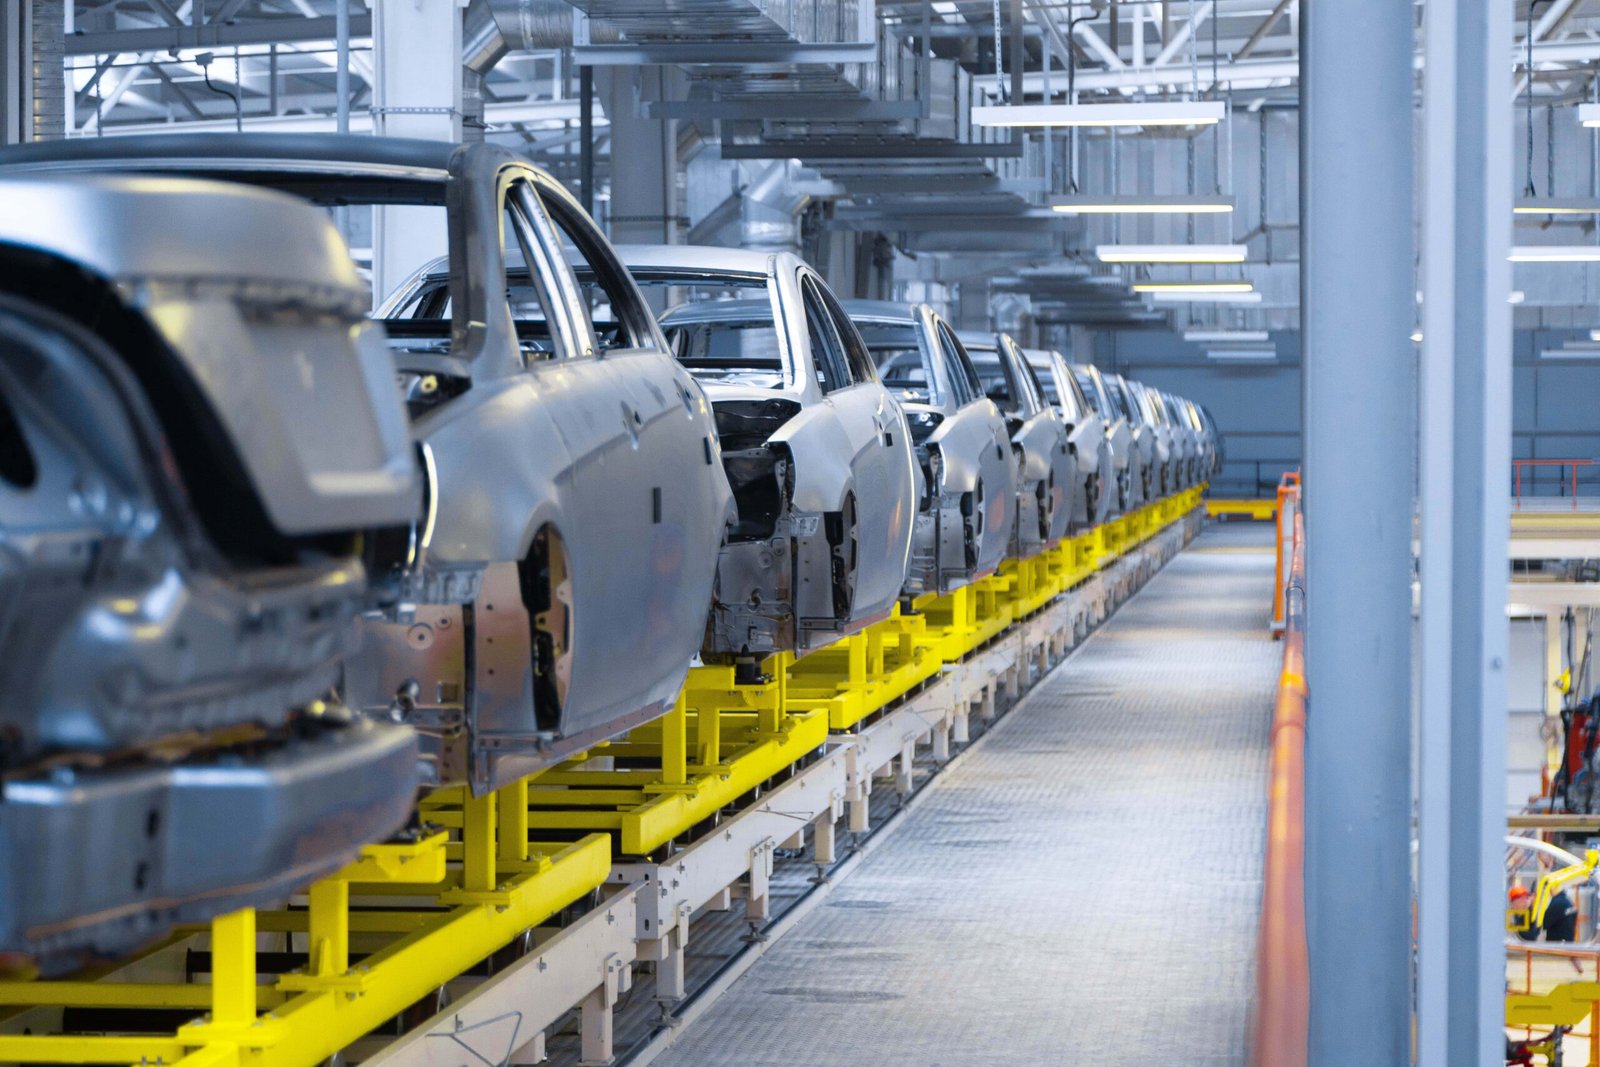 modern-automobile-production-line-automated-production-equipment-shop-assembly-new-modern-cars-way-assembly-car-assembly-line-plant-min (1)